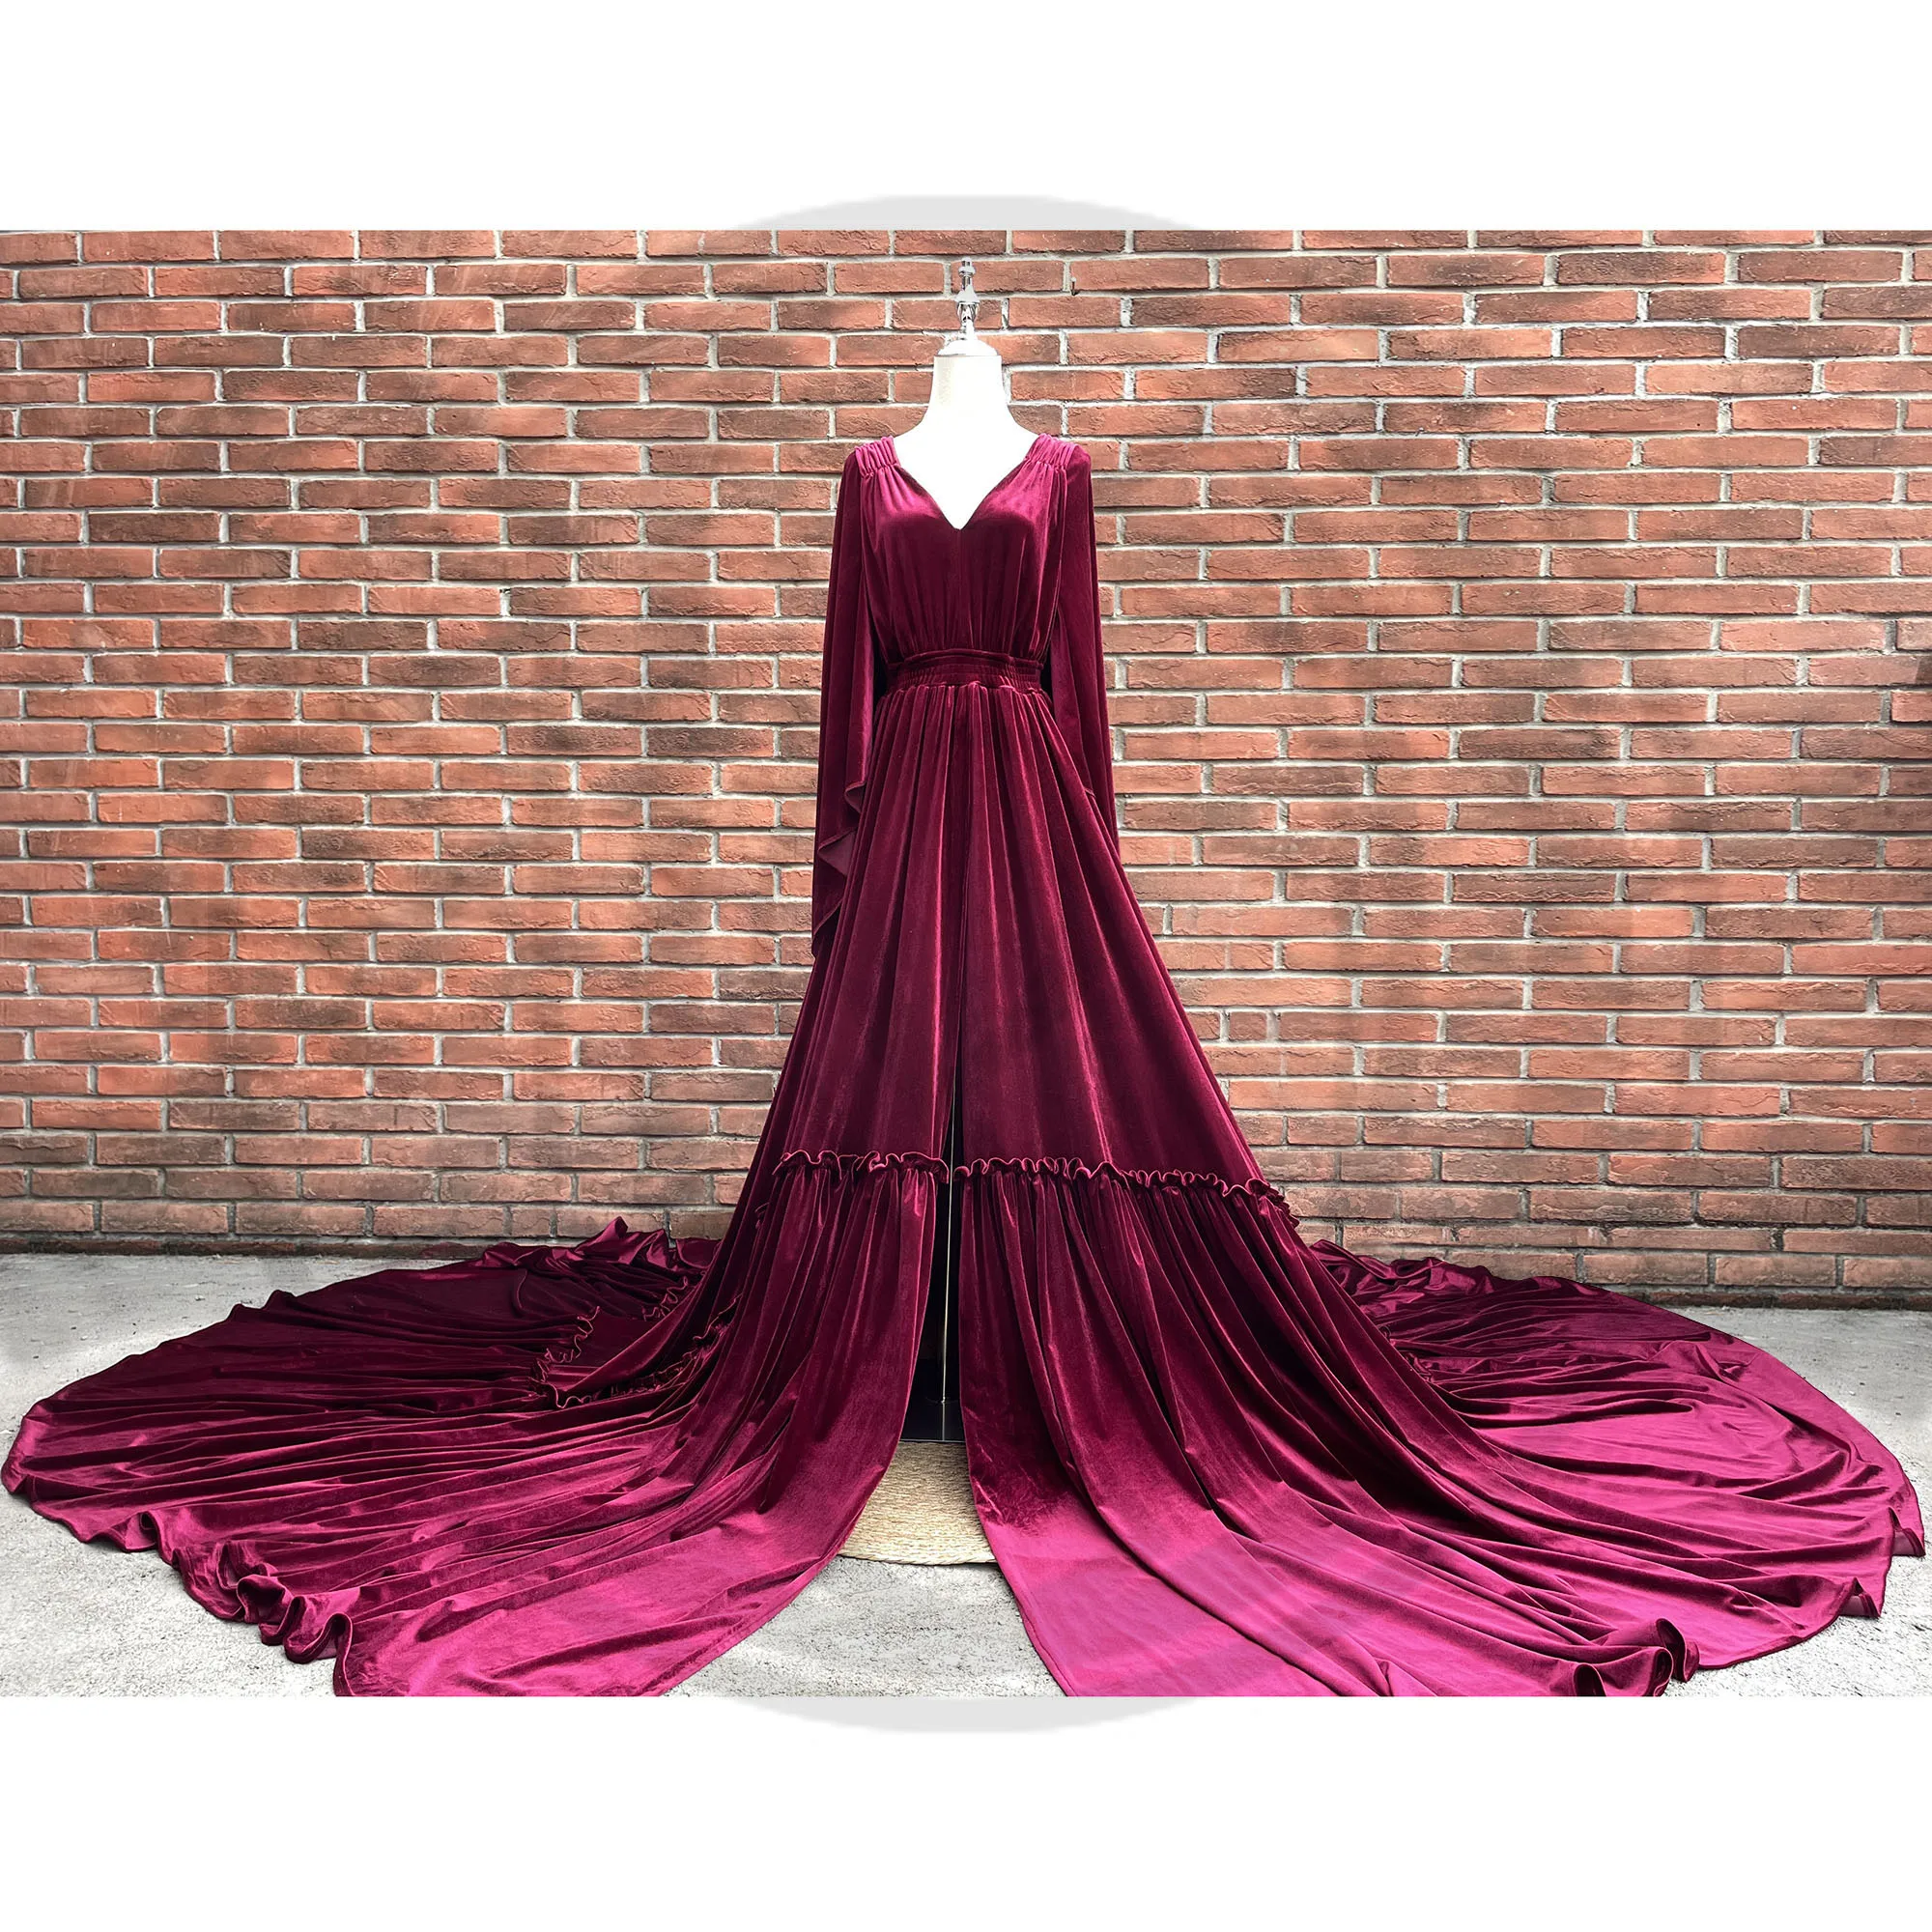 Enlarge Christmas Photo Shoot Maternity Dress Pregnant Velvet Gown Evening Party Robe for Woman Photography Prop Baby Shower Costume